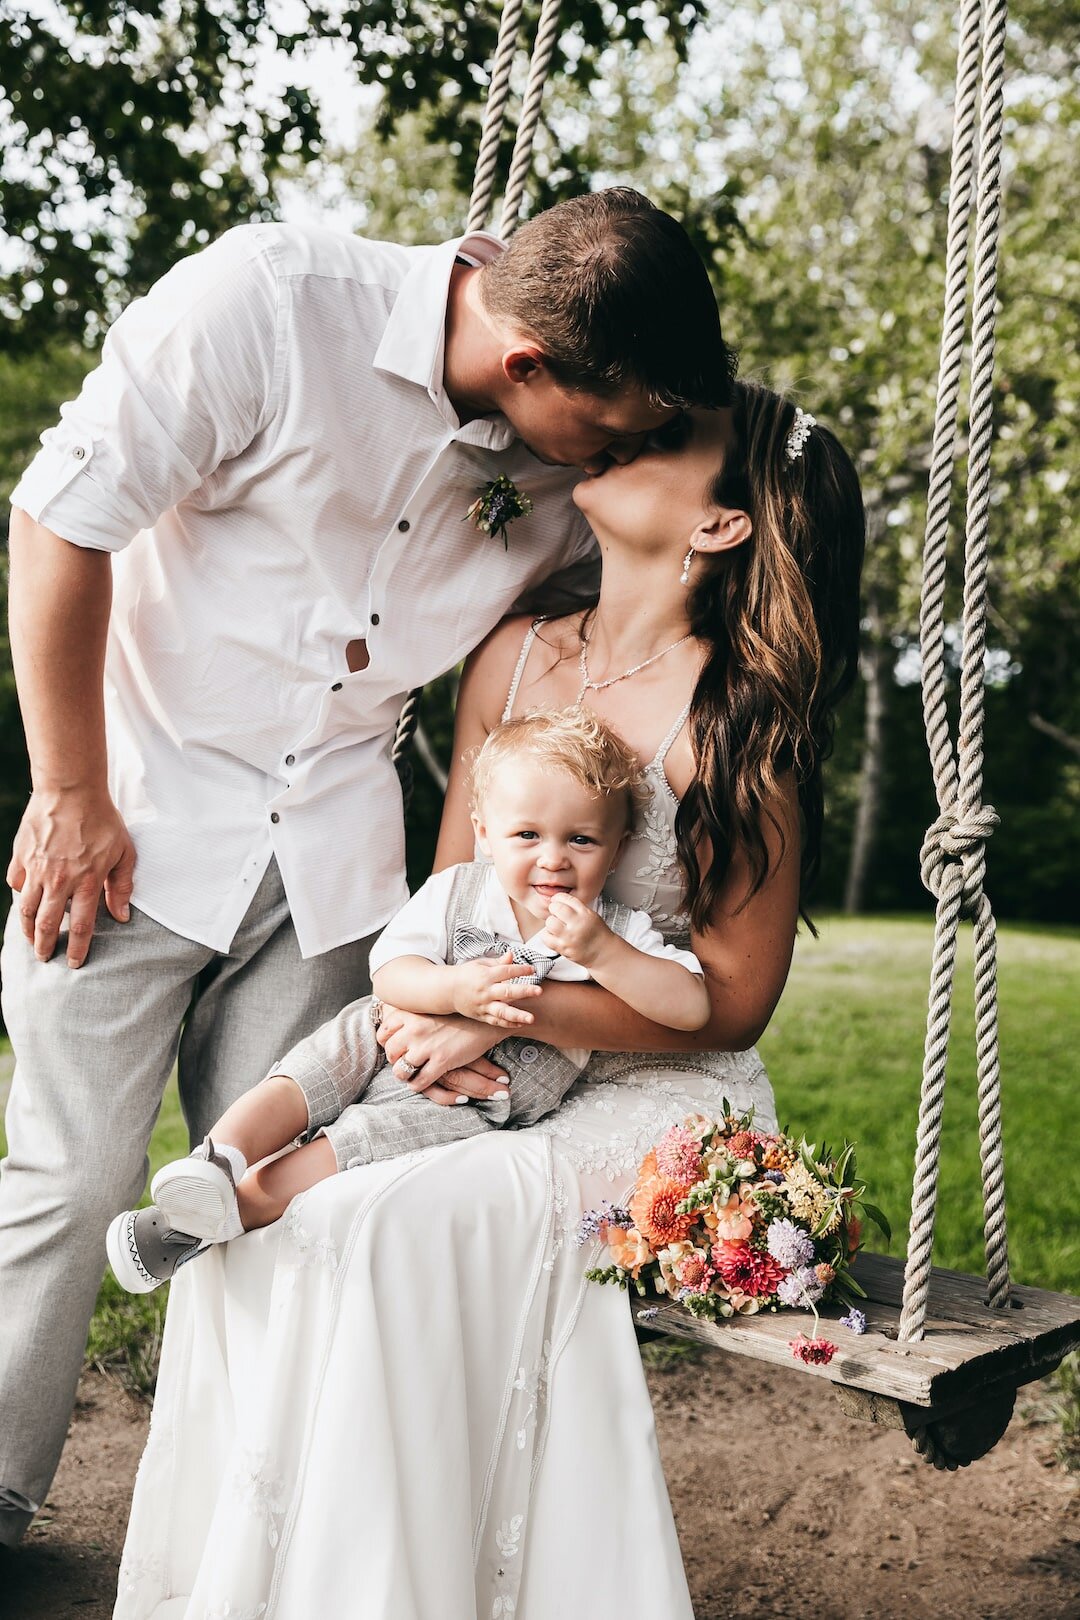 family portrait after MV elopement ceremony. Holding a baby on a swing.jpg